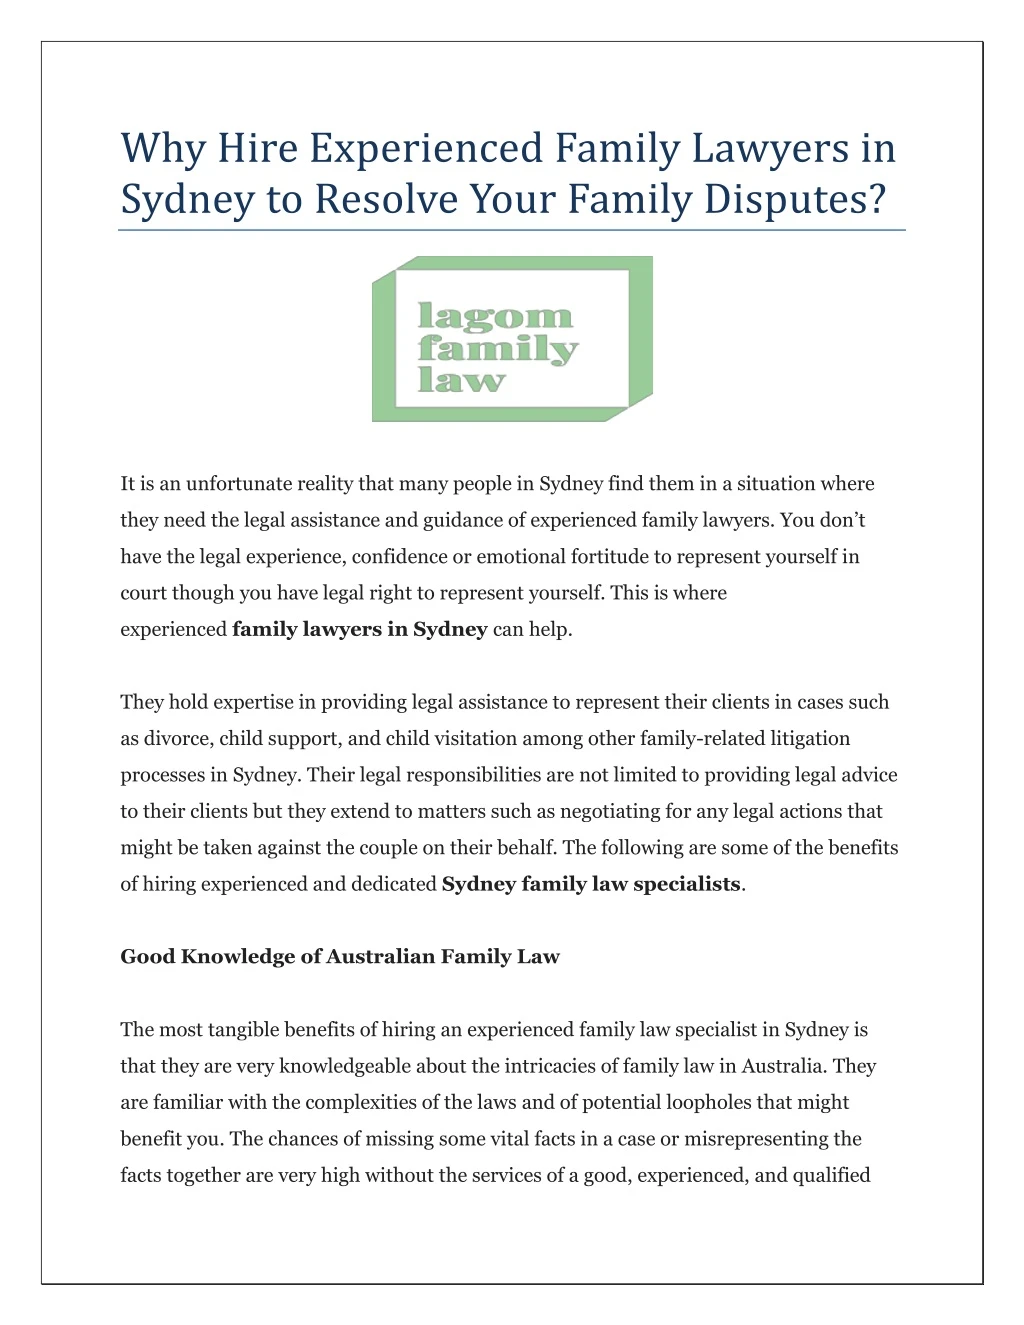 why hire experienced family lawyers in sydney